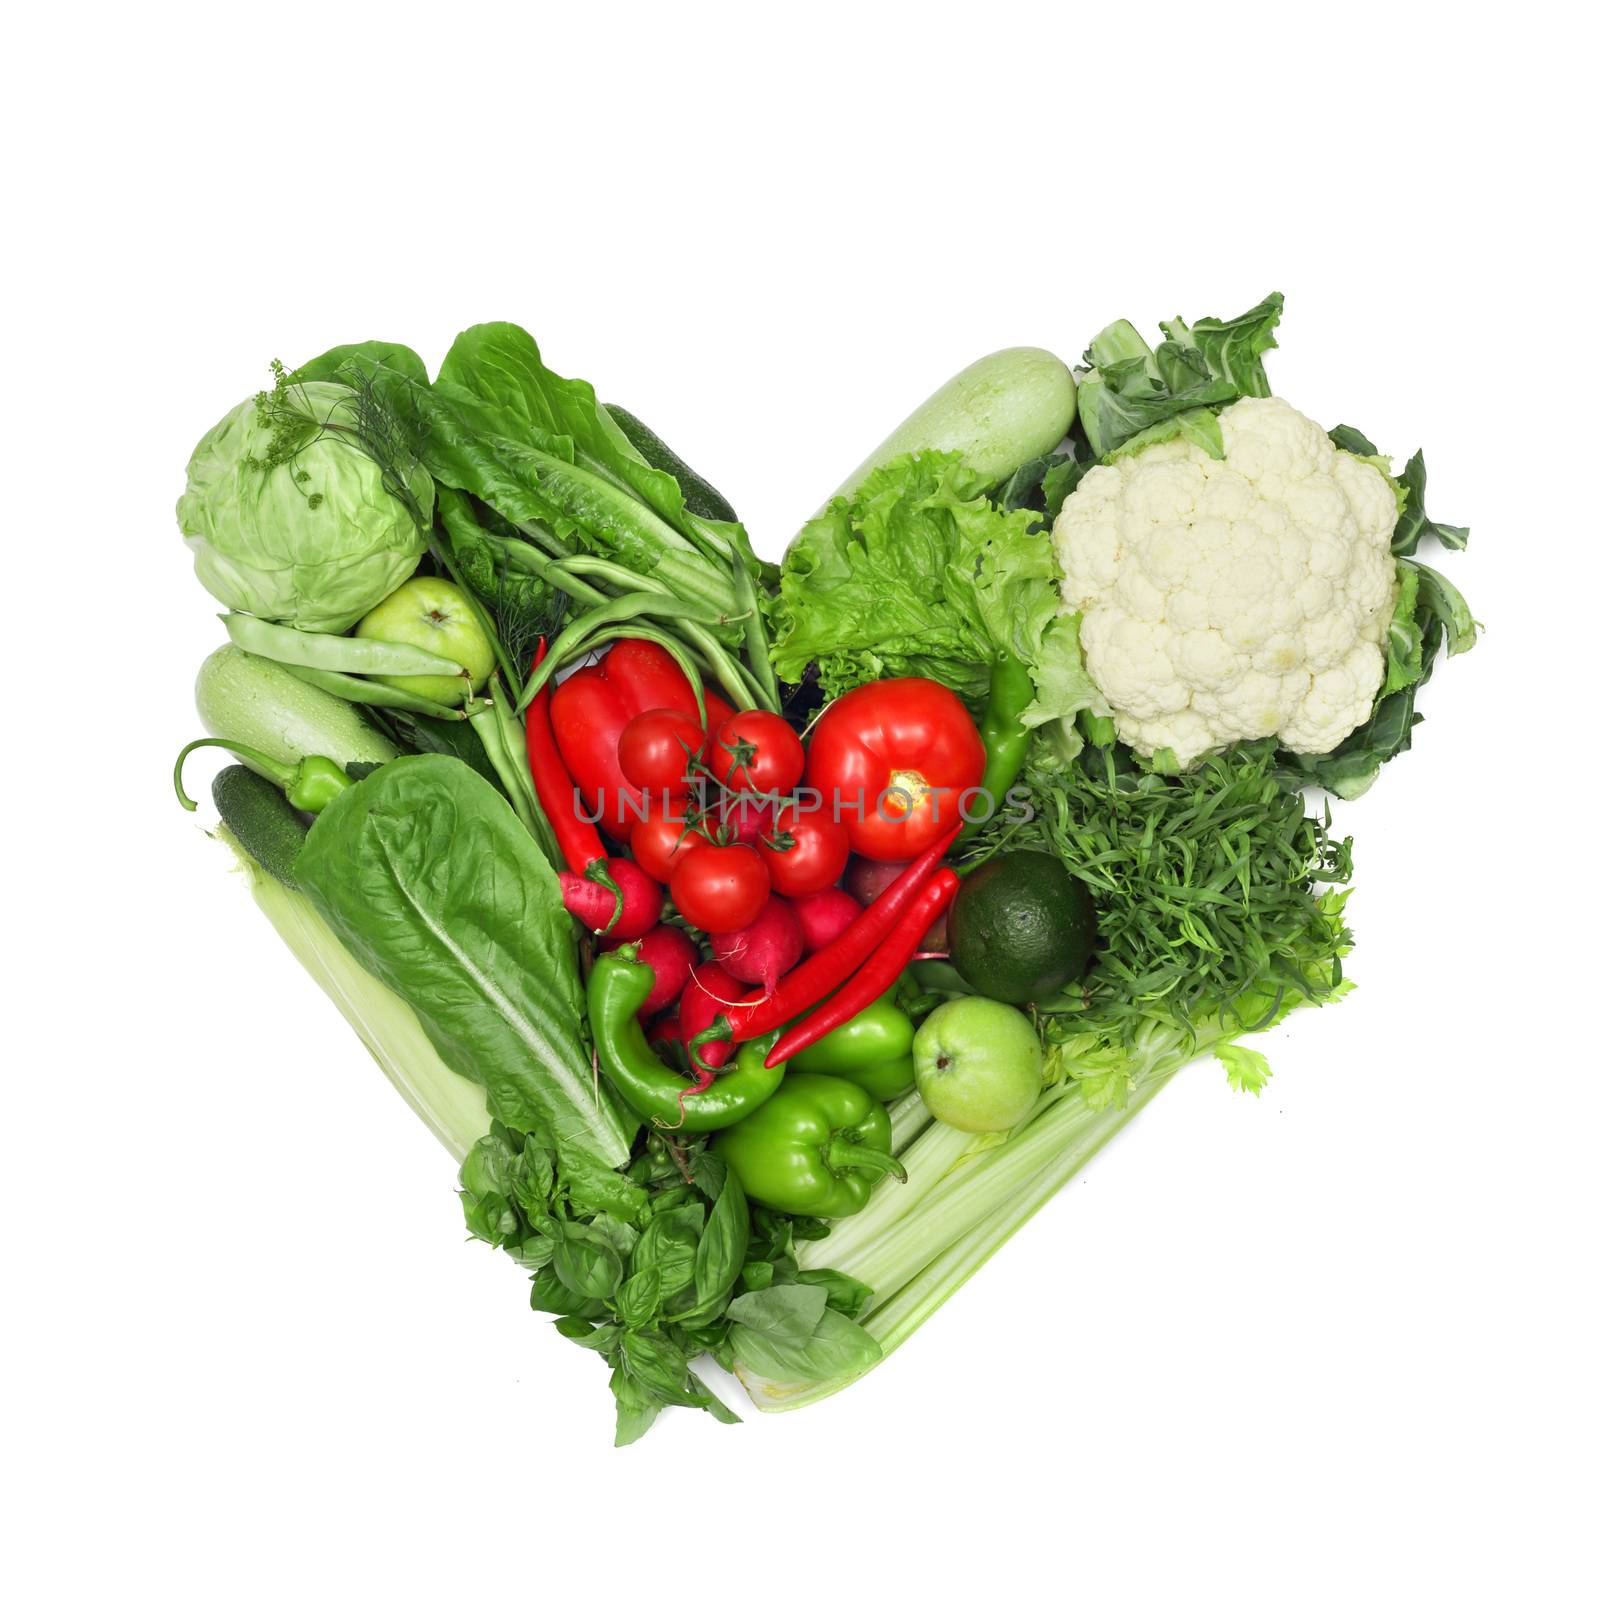 Red and green vegetable heart isolated on white background healthy eating love vegetarian food concept